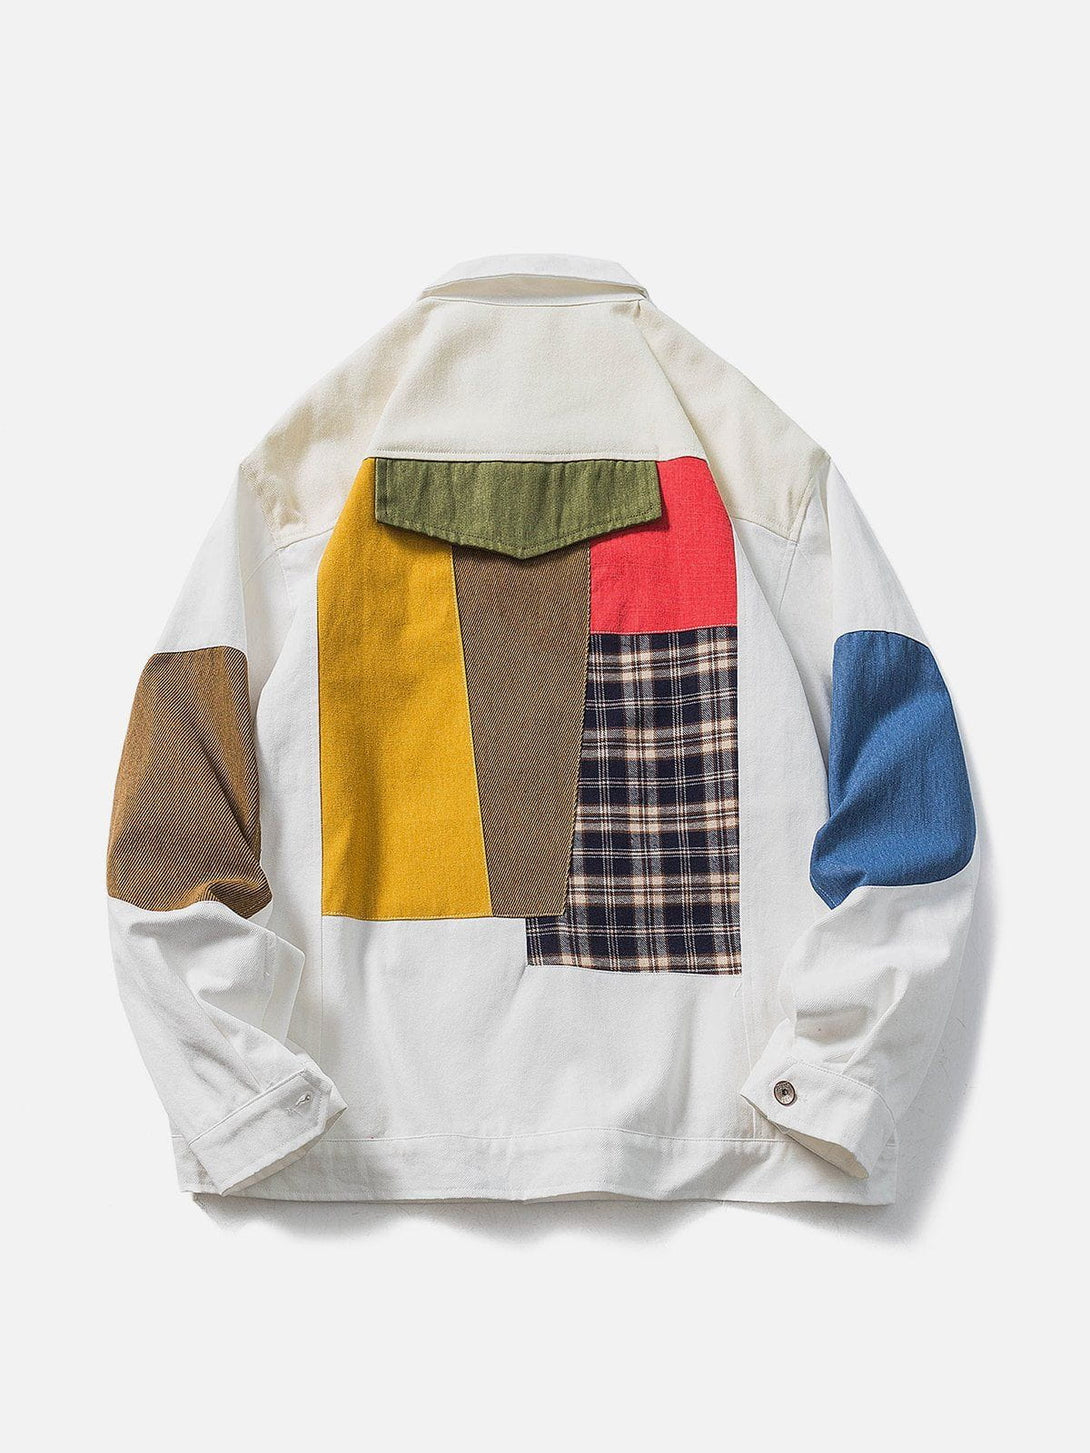 Ellesey - Contrast Color Stitching Jacket- Streetwear Fashion - ellesey.com